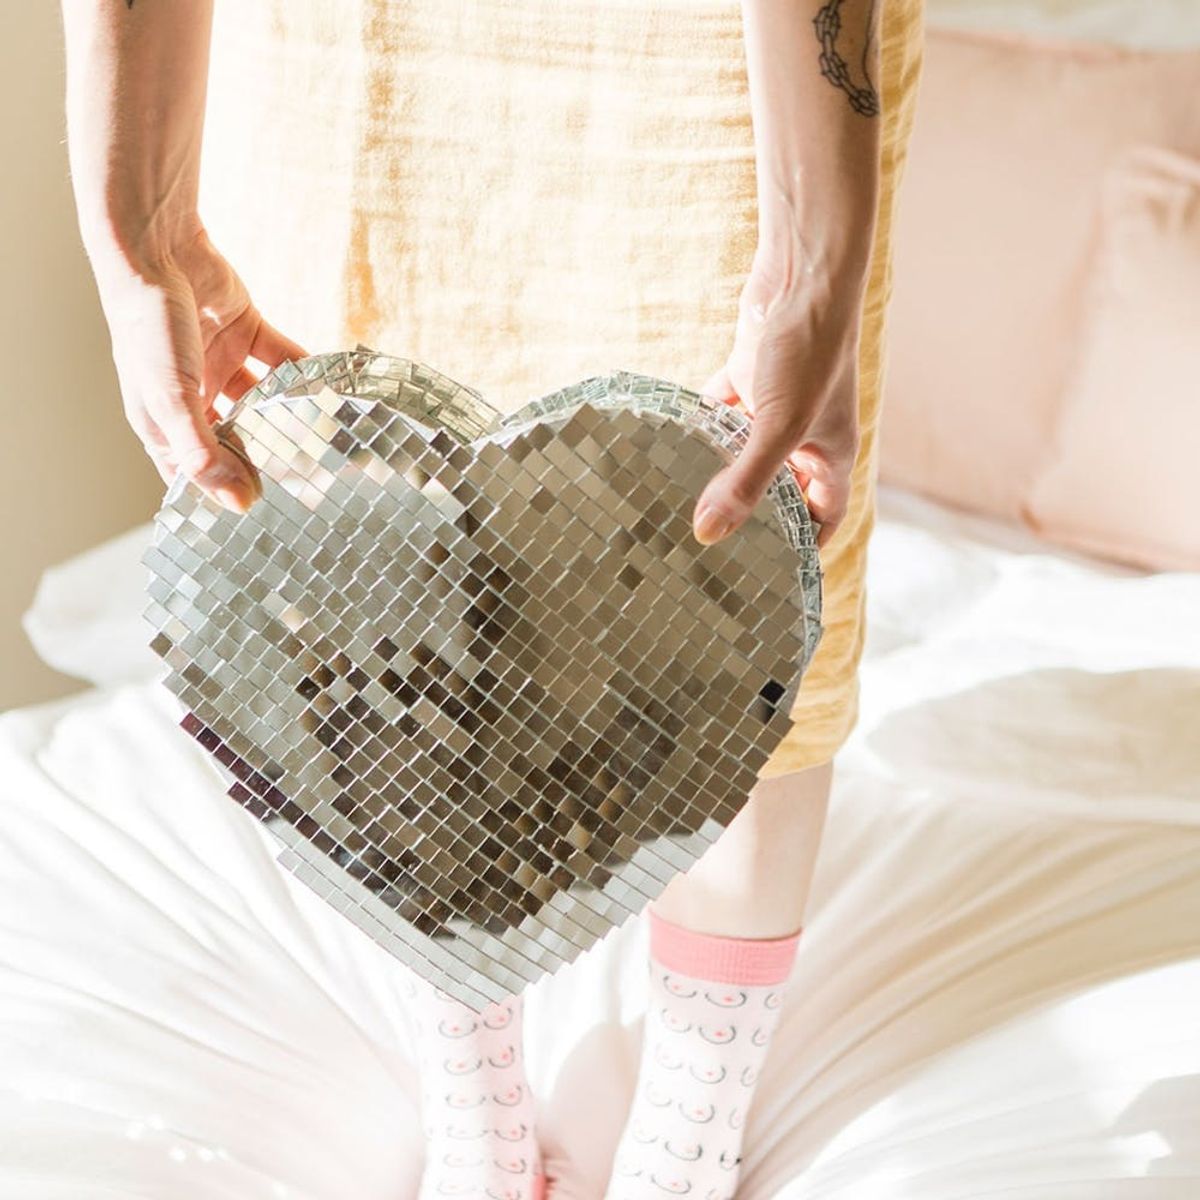 Get Your Groove on With This Heart-Shaped Disco Ball